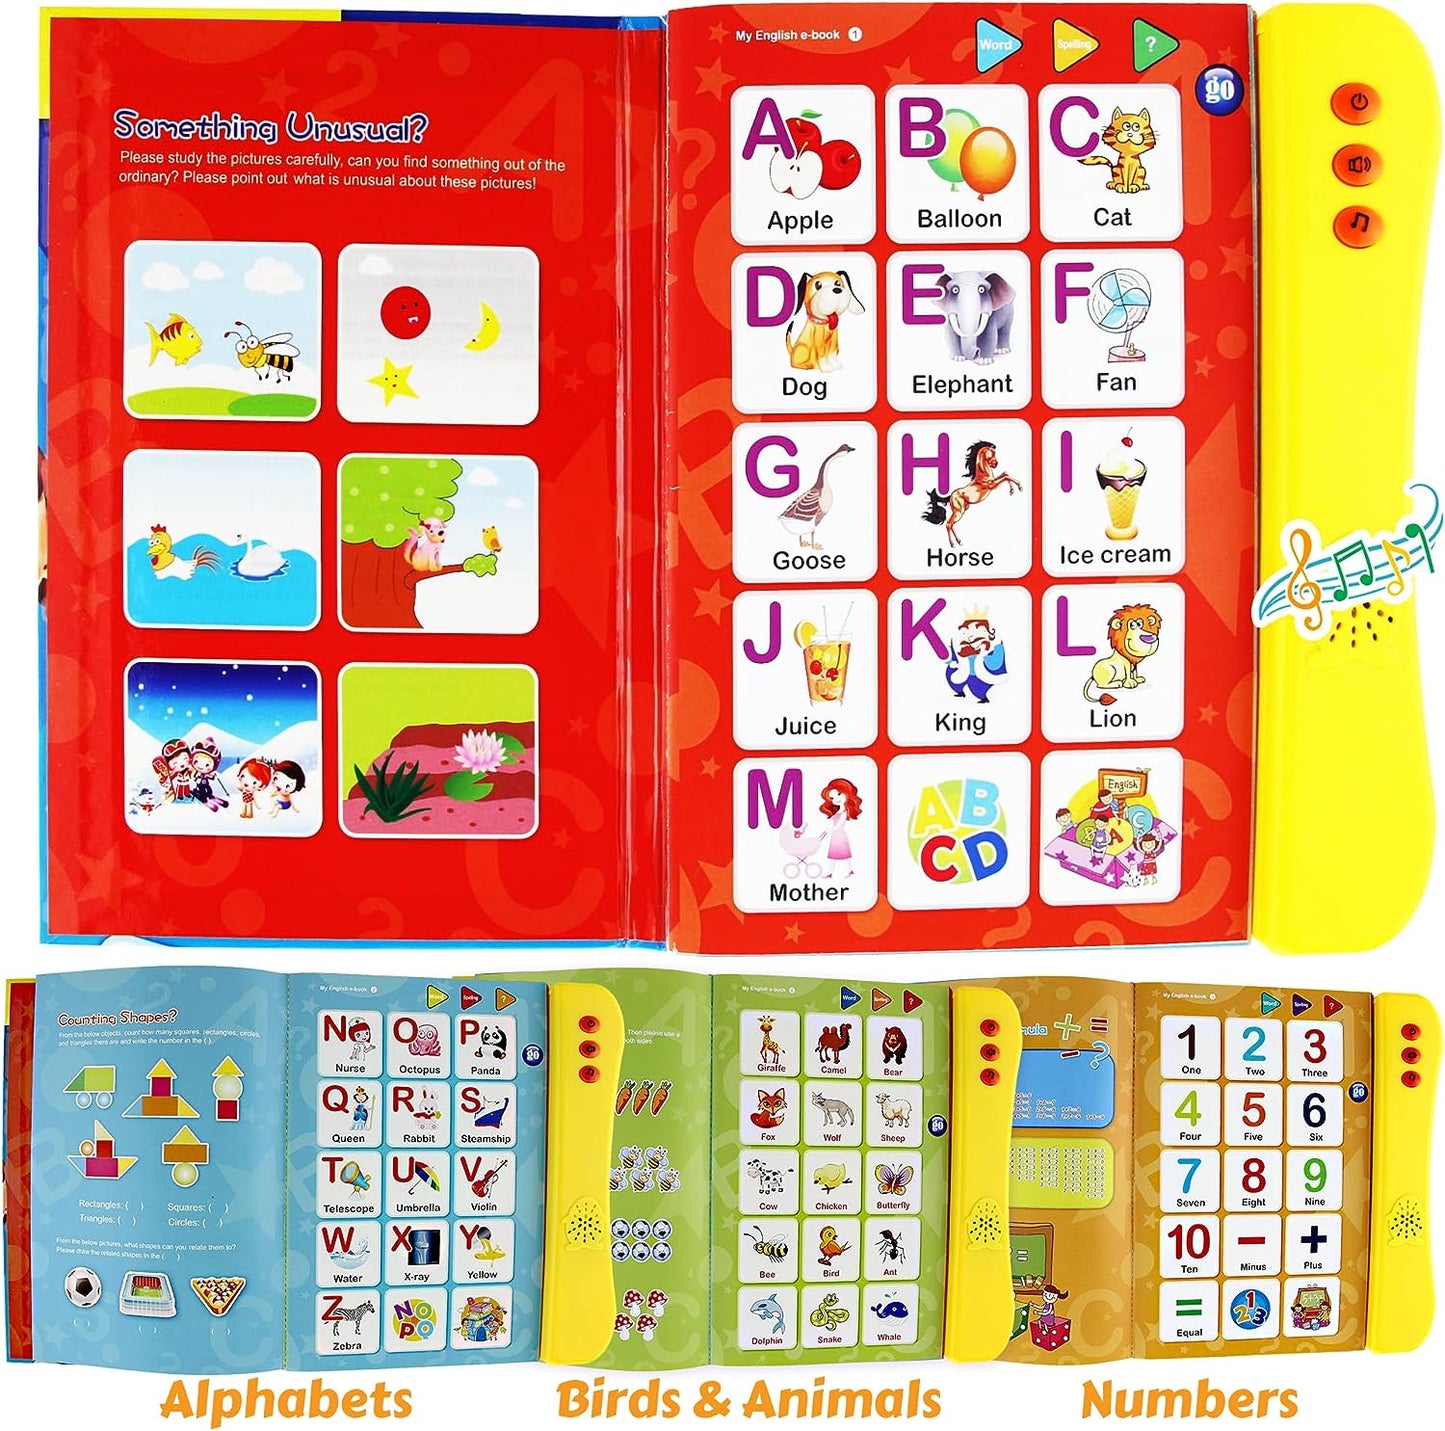 Preschool Learning Activities Book: Educational Toys for Toddlers 1-3, Toddler Learning Toys, Kids Books 3-5 - Ideal Learning Toys for 4 Year Old Boys & Girls